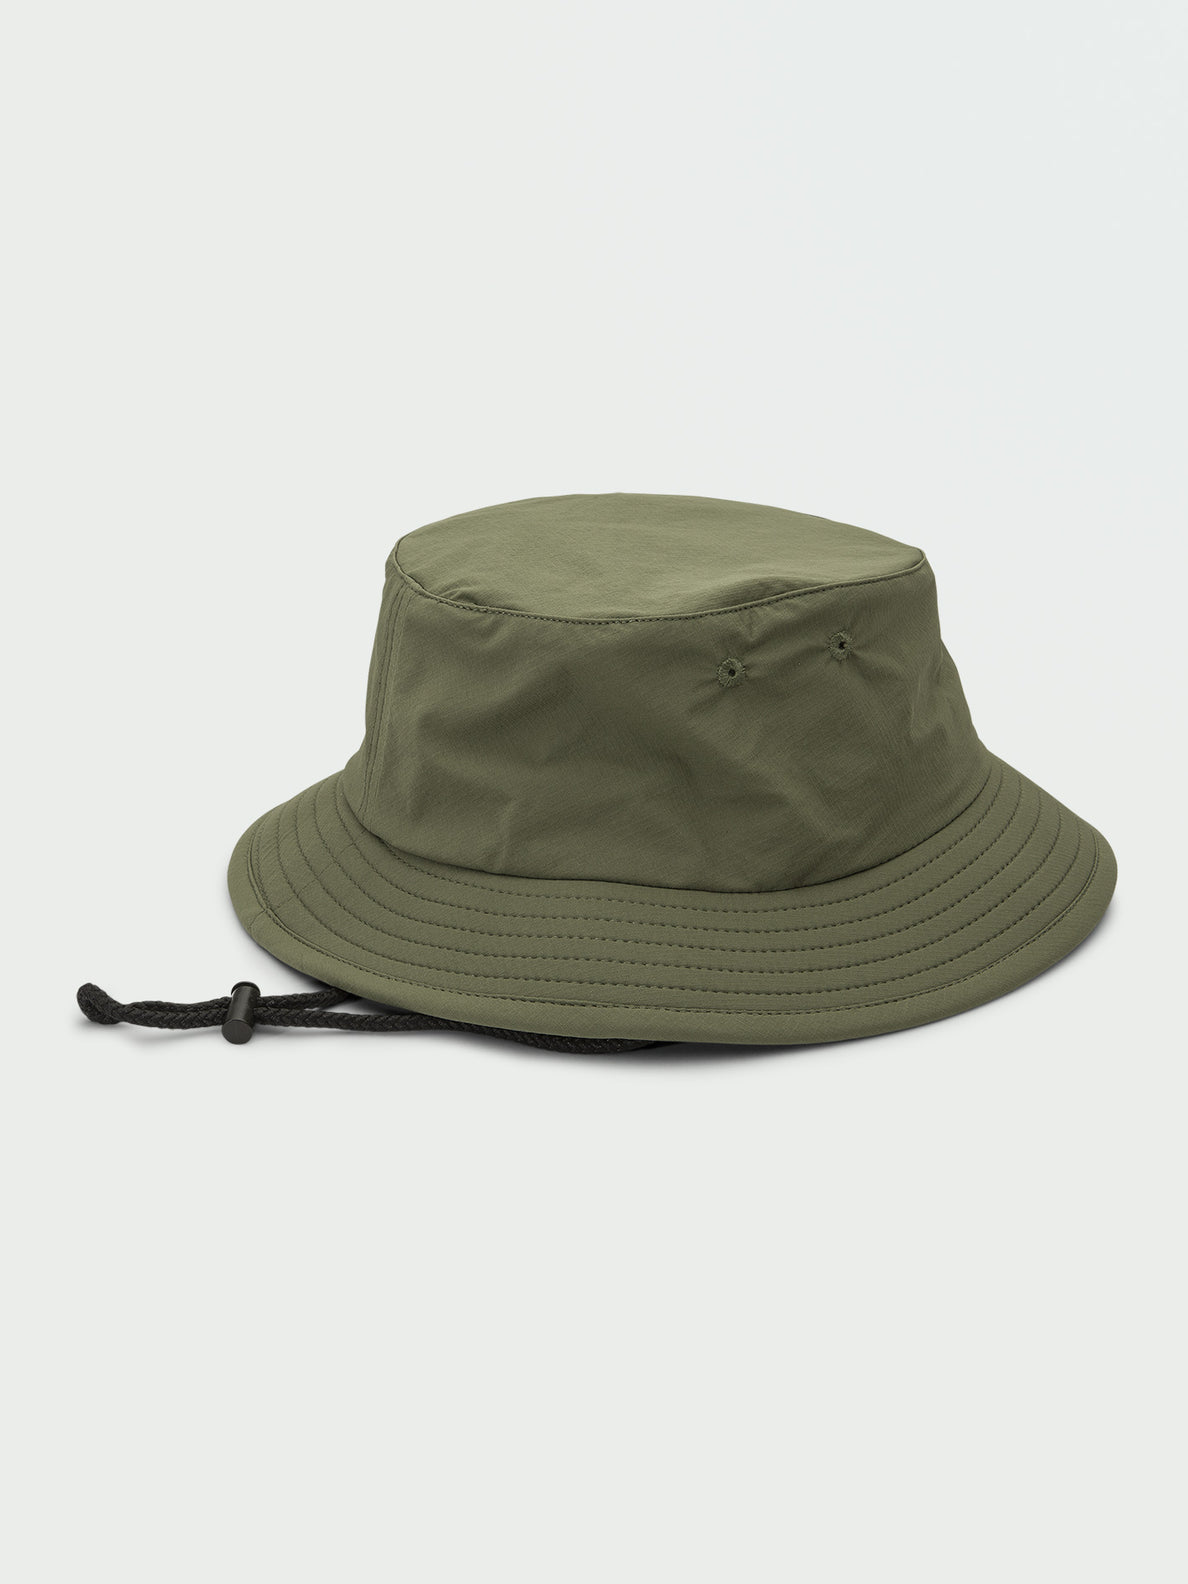 About Time Bucket Hat - Thyme Green